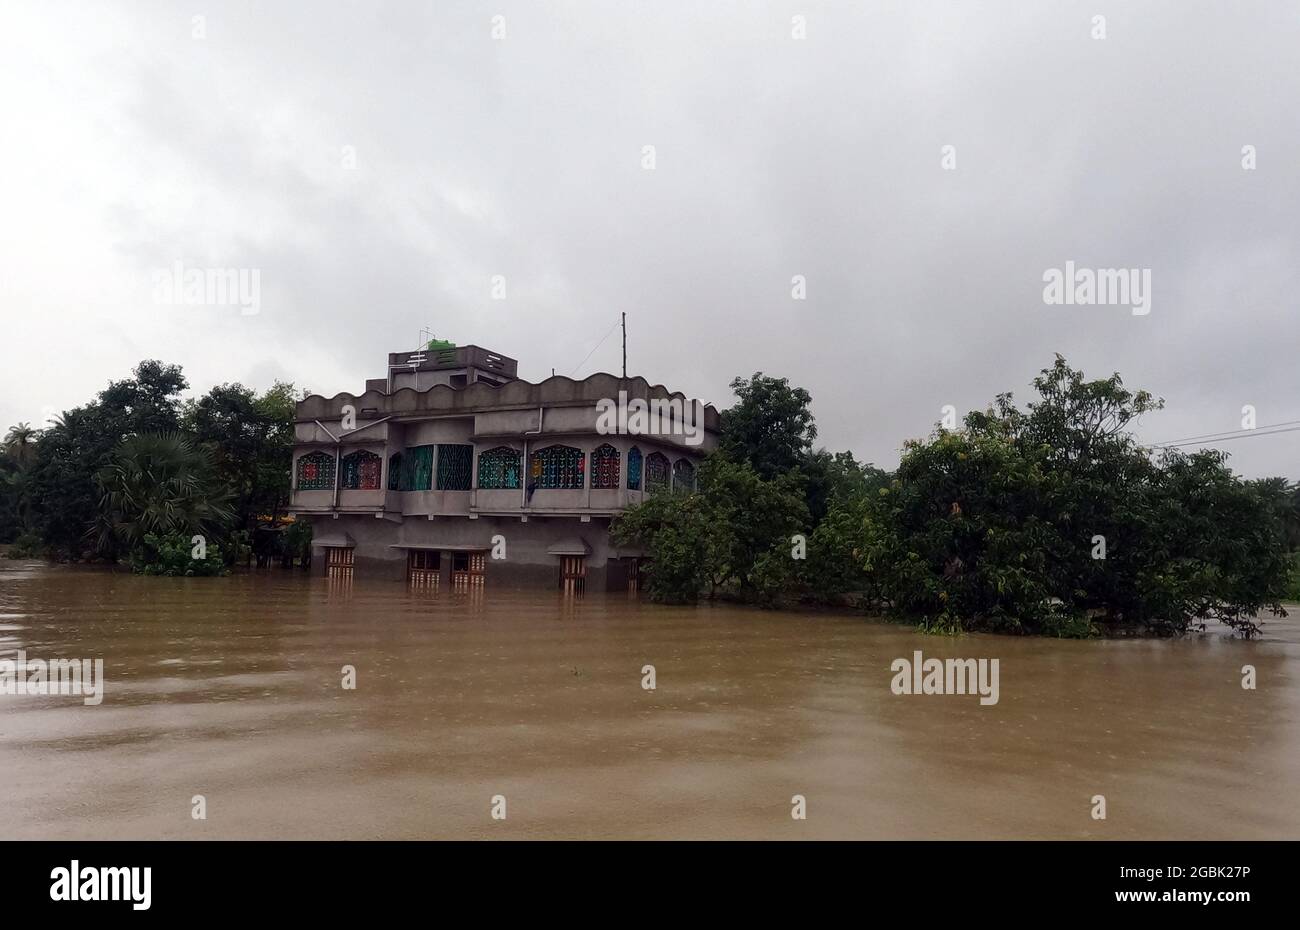 West Bengal. 4th Aug, 2021. Photo taken on Aug. 4, 2021 shows a building in floodwaters in Hoogly district of India's West Bengal State. Credit: Str/Xinhua/Alamy Live News Stock Photo